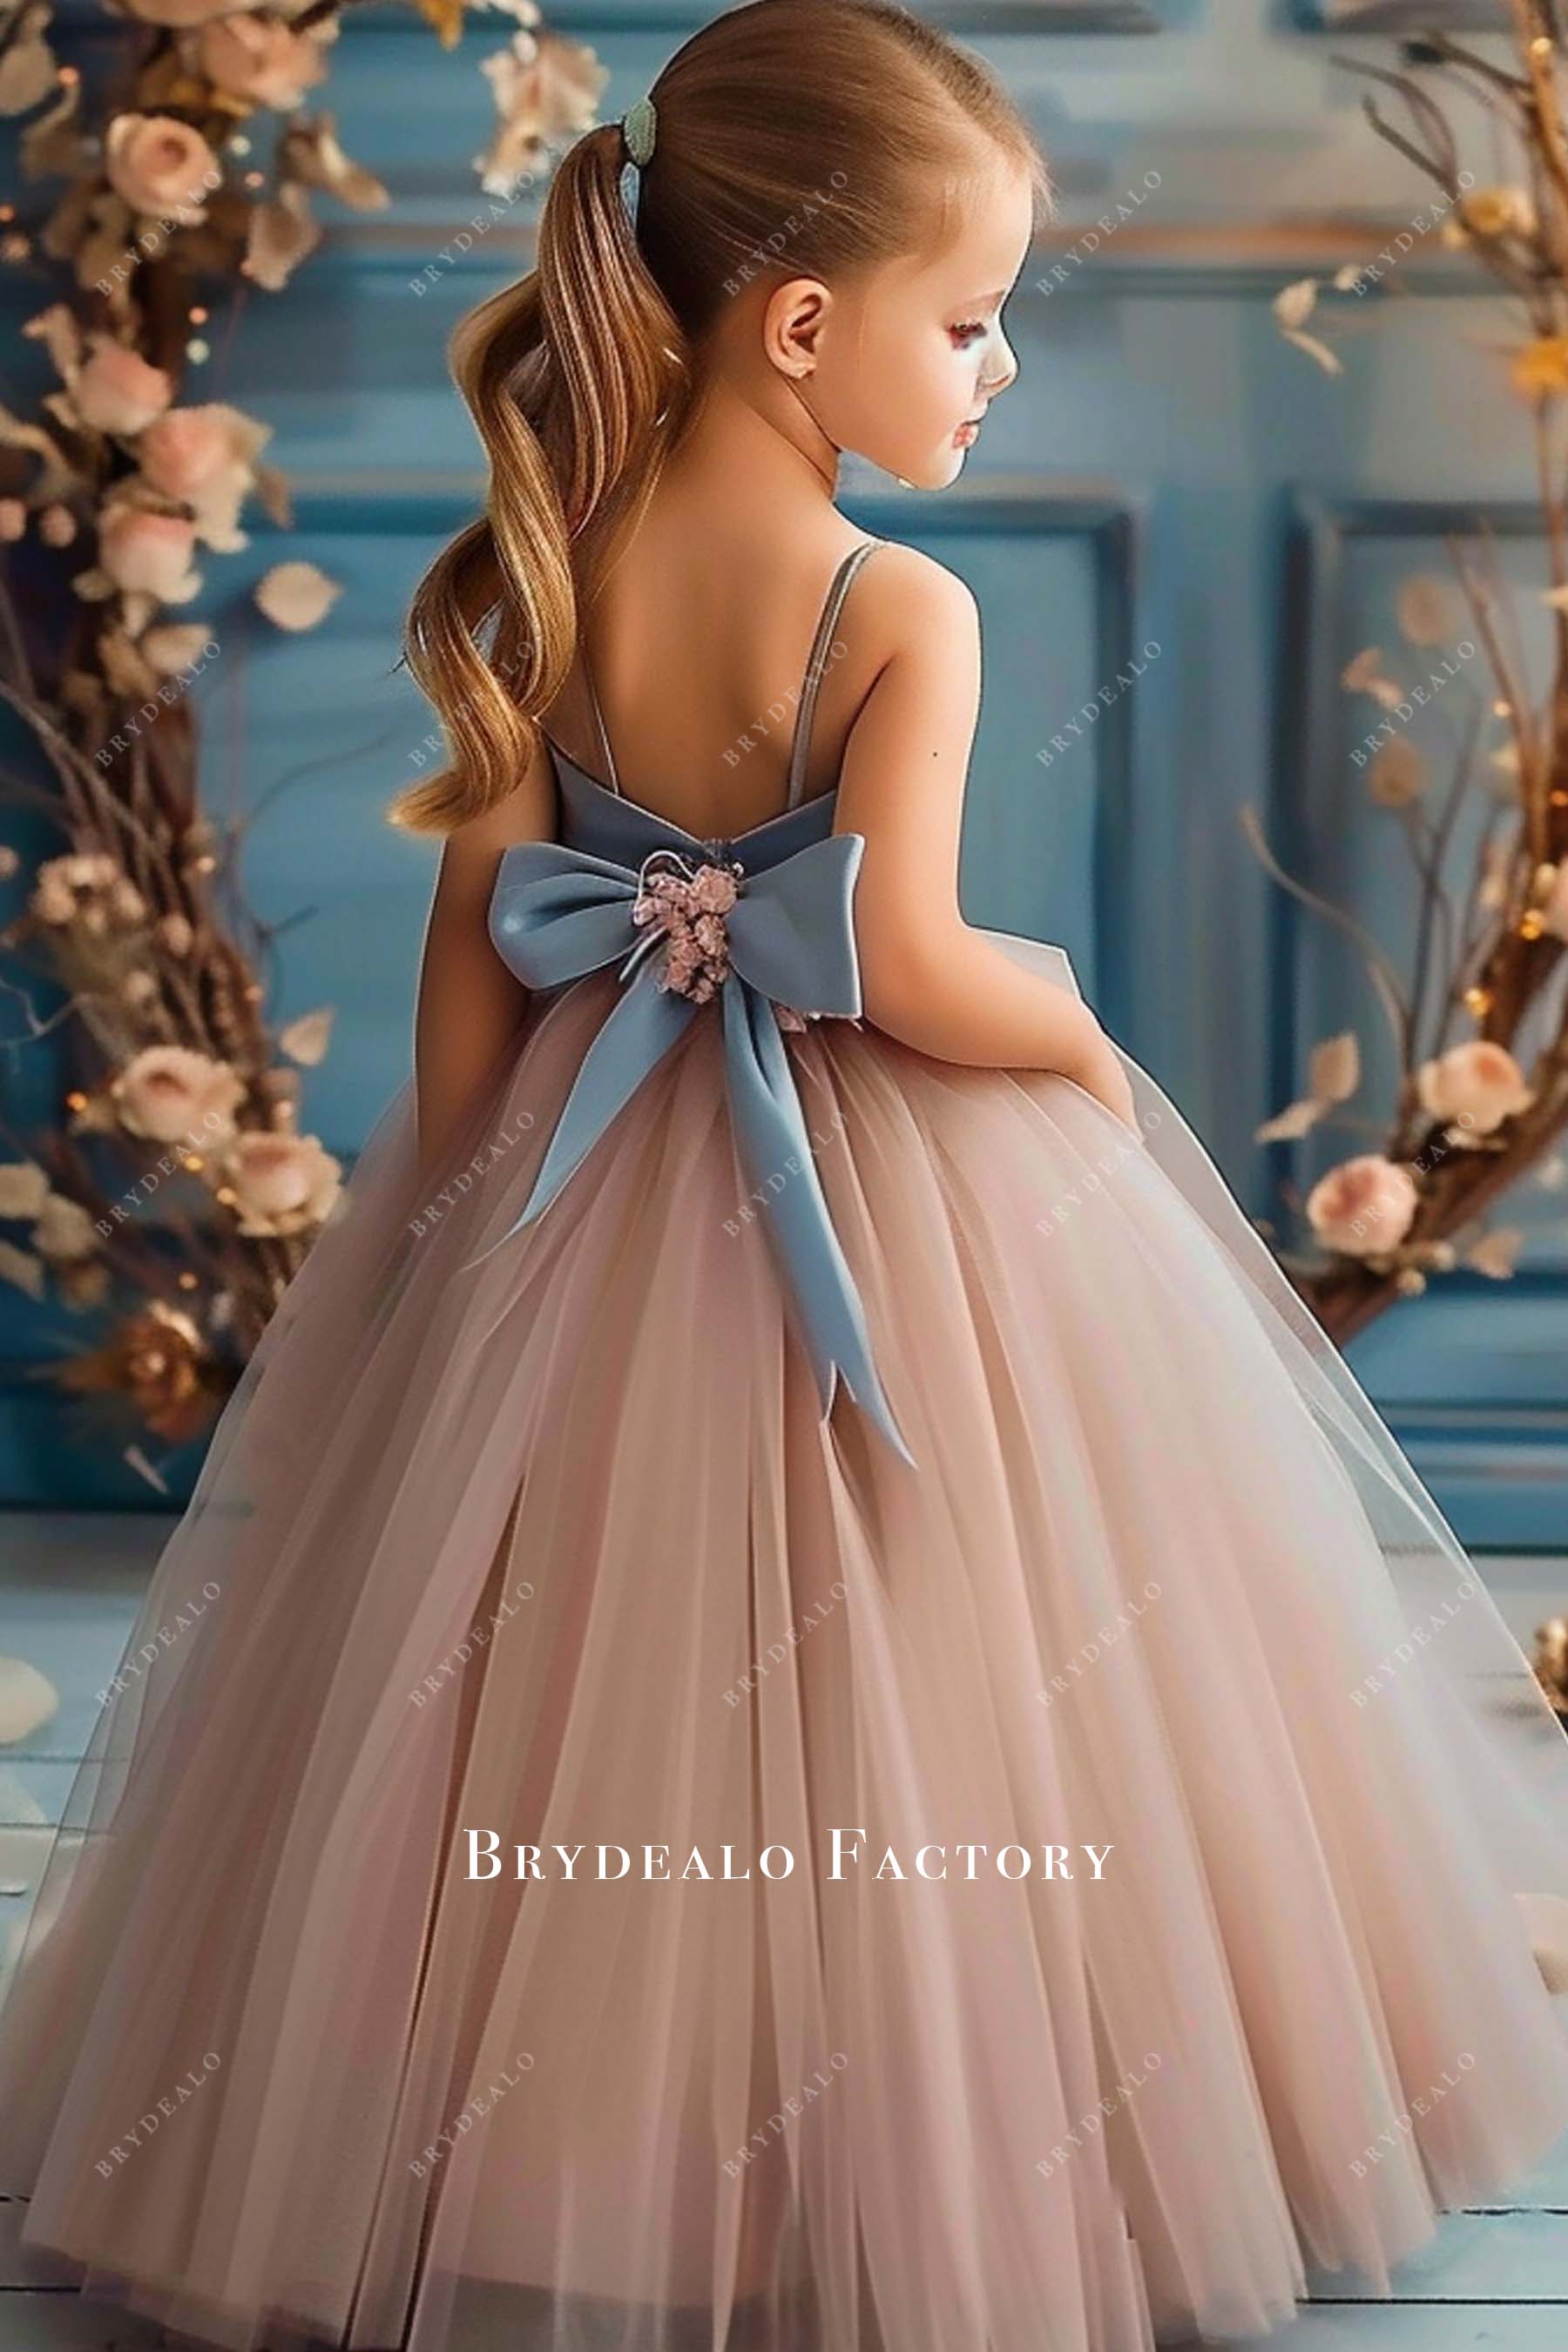 Dusty Blue Satin Bowknot Nude Pink Tulle Flower Girl Ball Gown